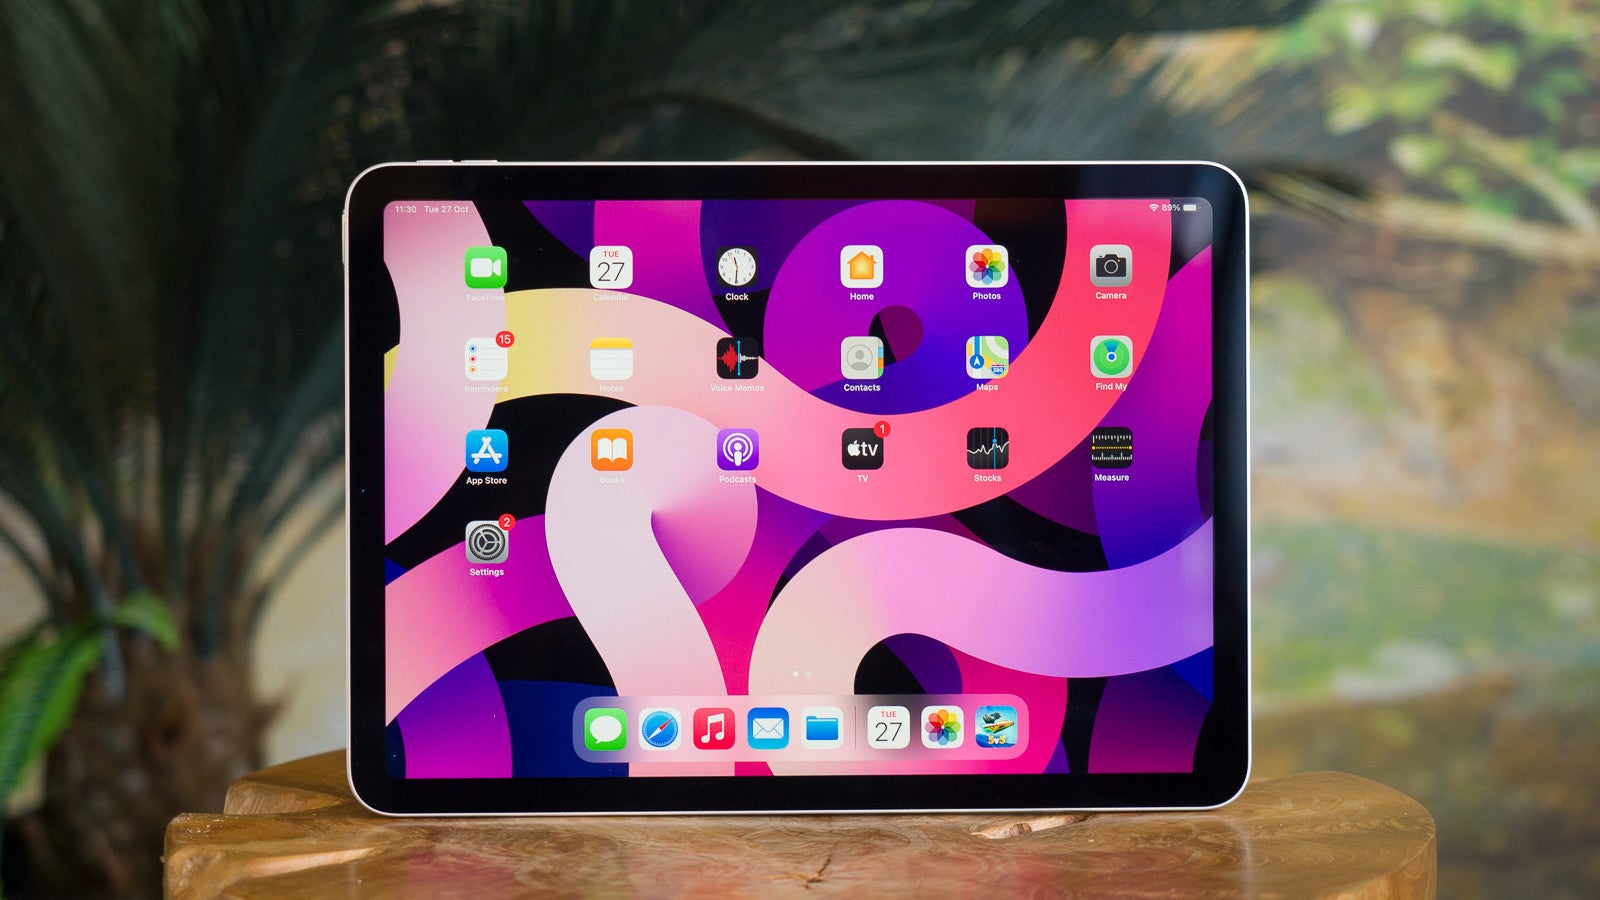 Apple tipped to release 10.9inch OLED iPad Air in 2022, OLED iPad Pro